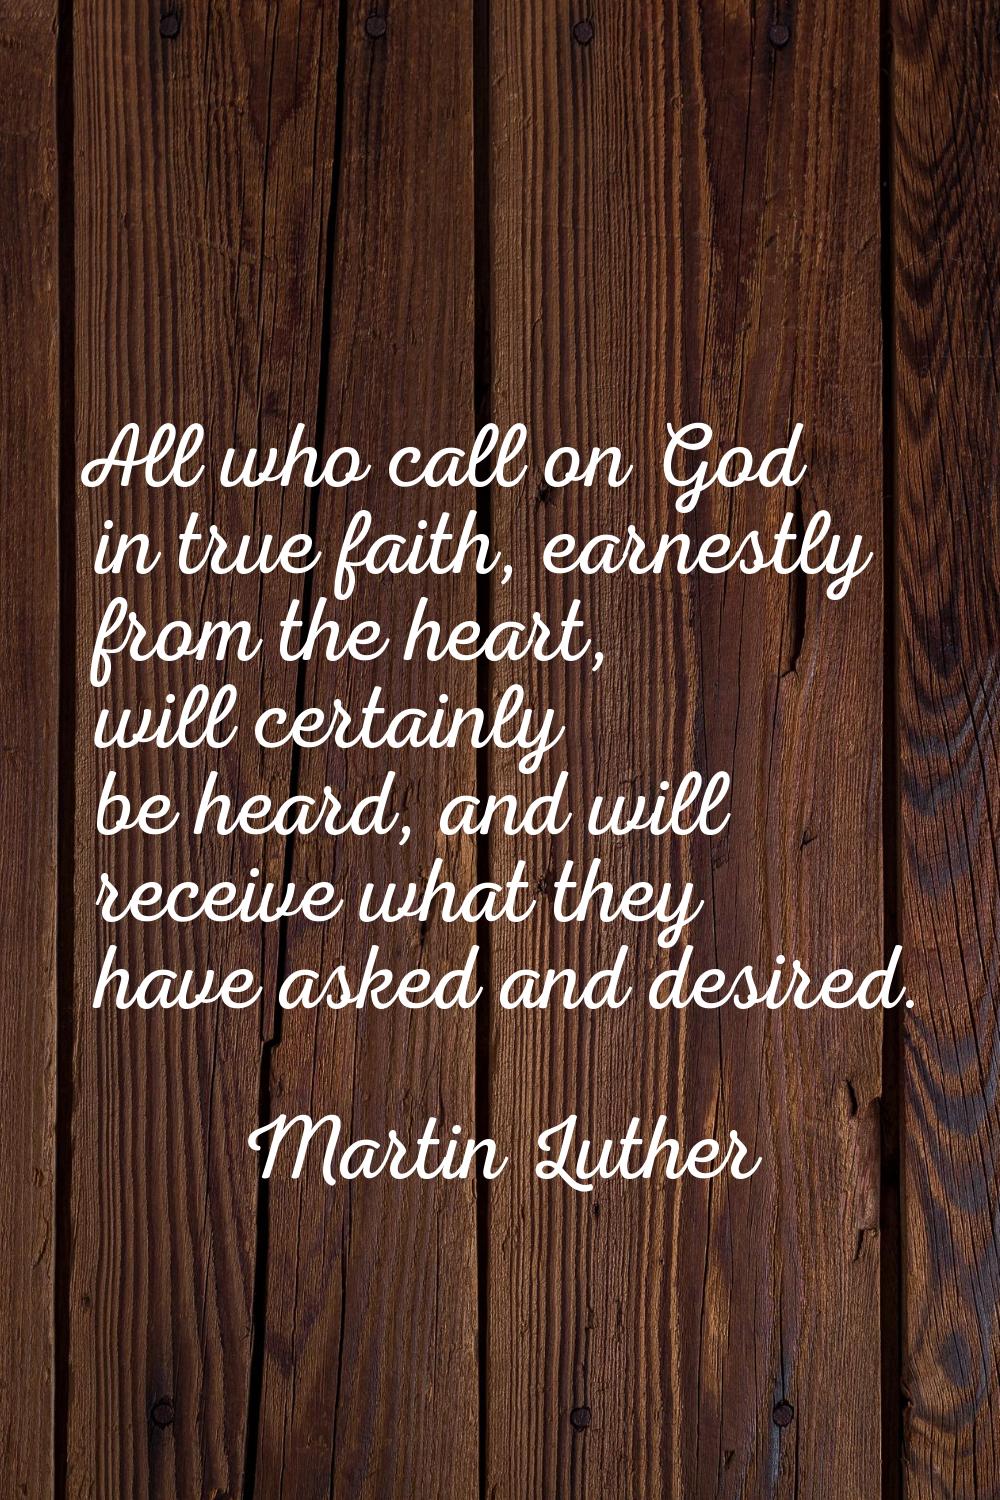 All who call on God in true faith, earnestly from the heart, will certainly be heard, and will rece